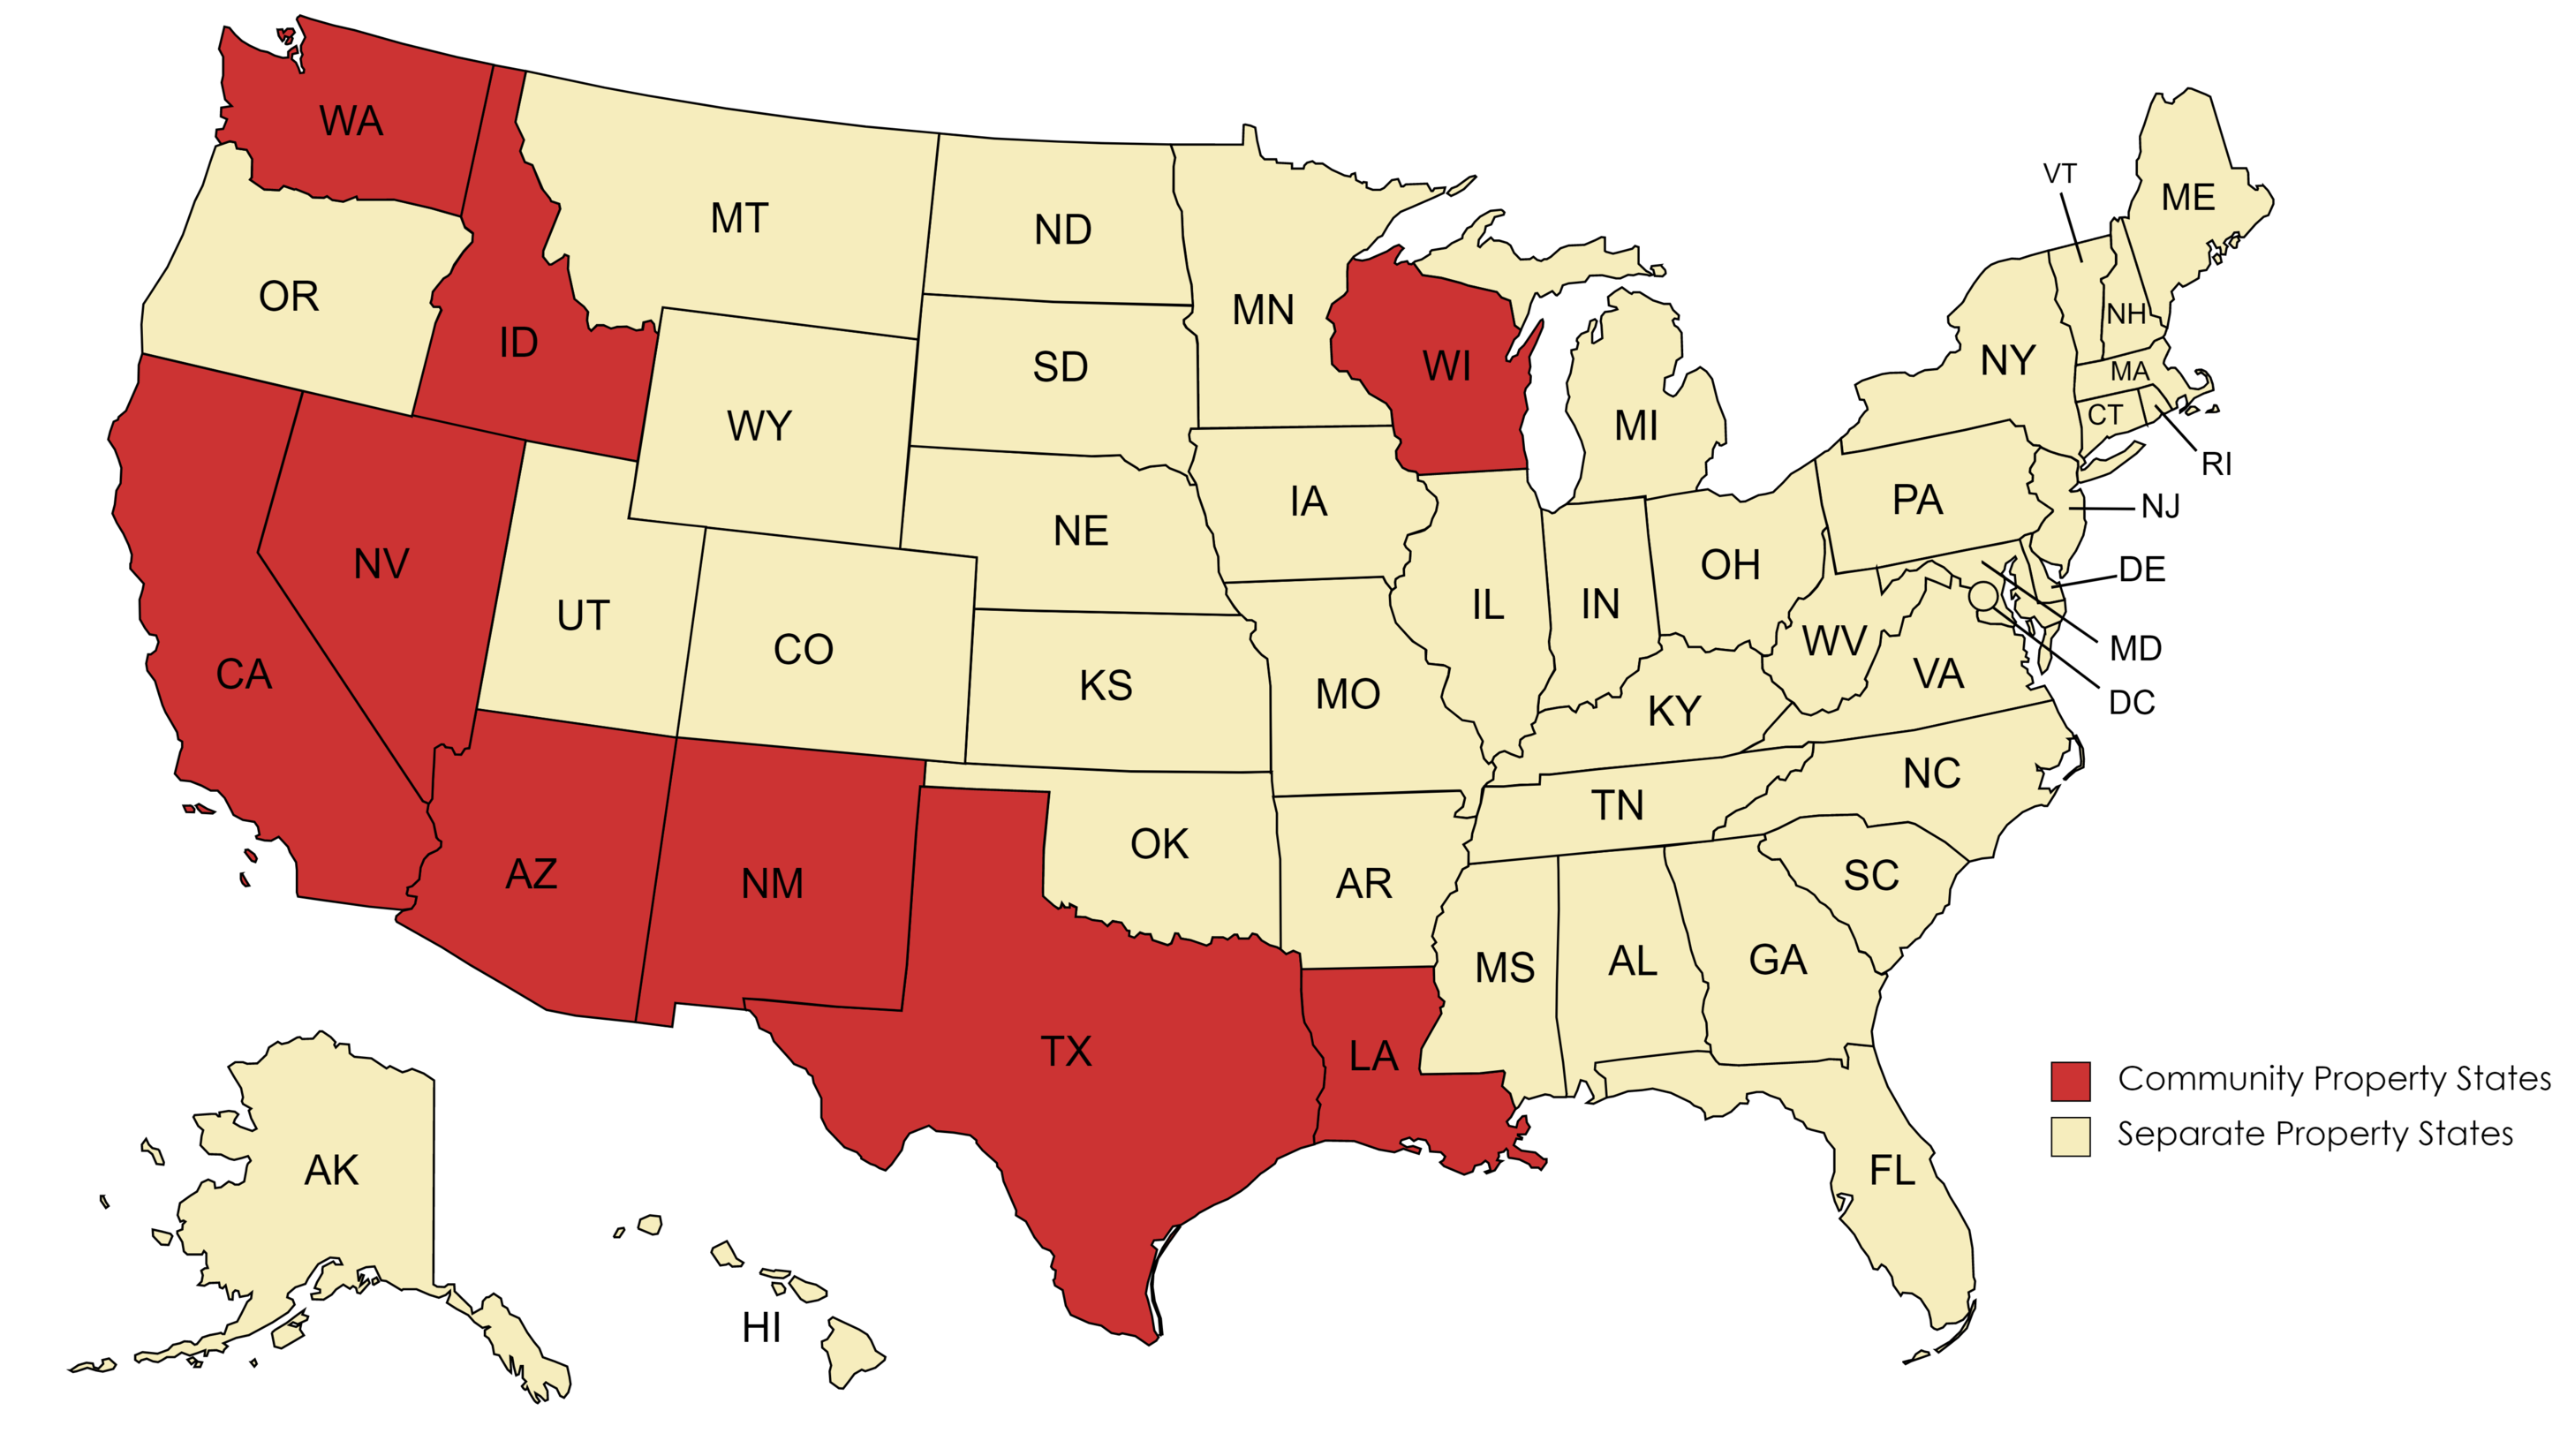 map of the US showing nine states color coded in red to depict community property states, including Washington, Idaho, Wisconsin, Nevada, California, Arizona, New Mexico, Texas and Louisiana